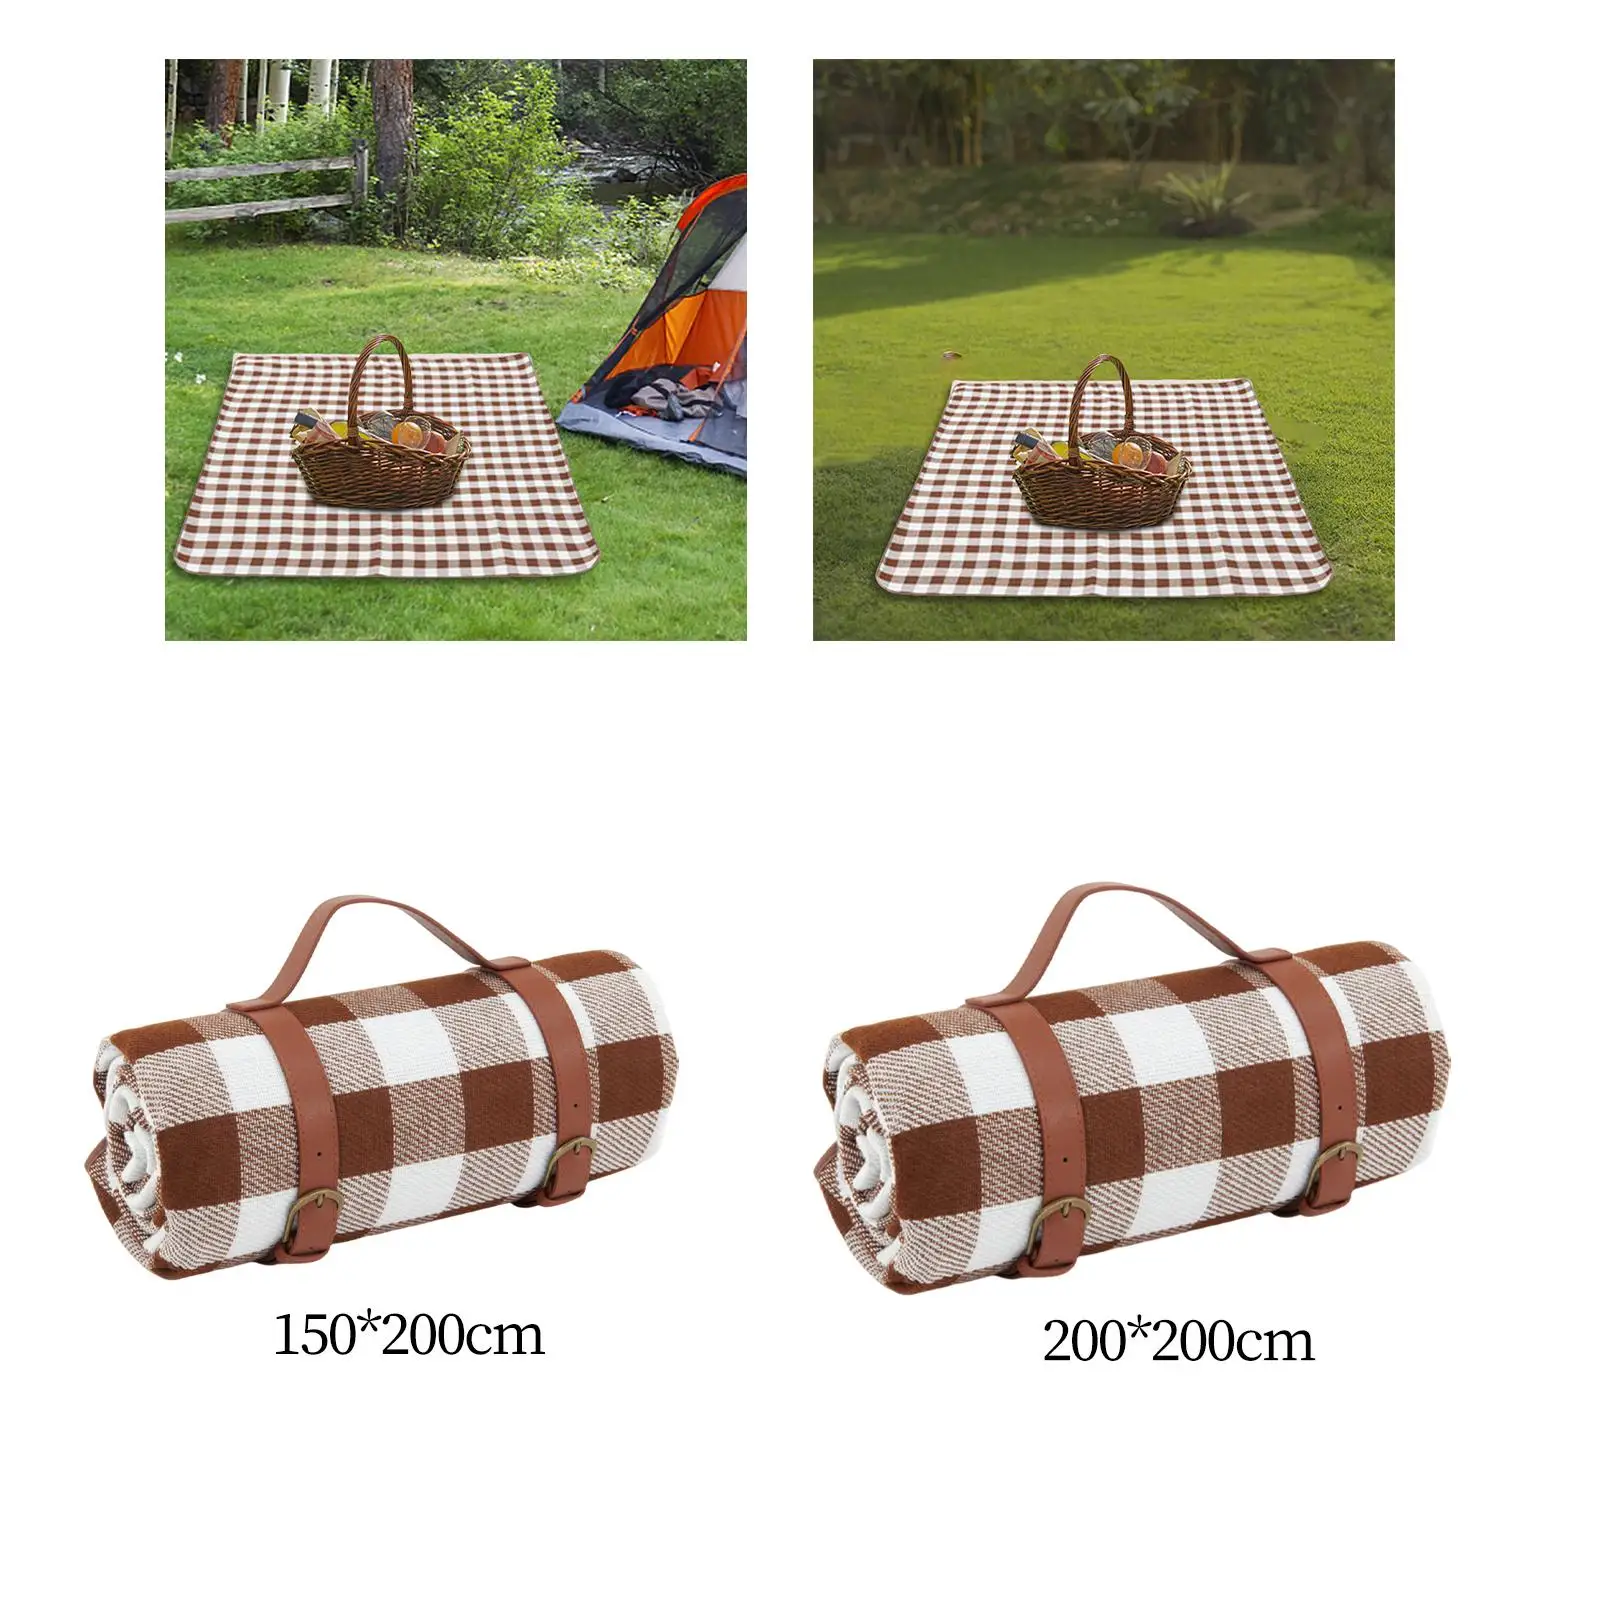 Picnic Blanket PU Leather Handle Outdoor Blanket Portable beach mat Picnic Mat Folding Rug for Park Camping Travel Festivals